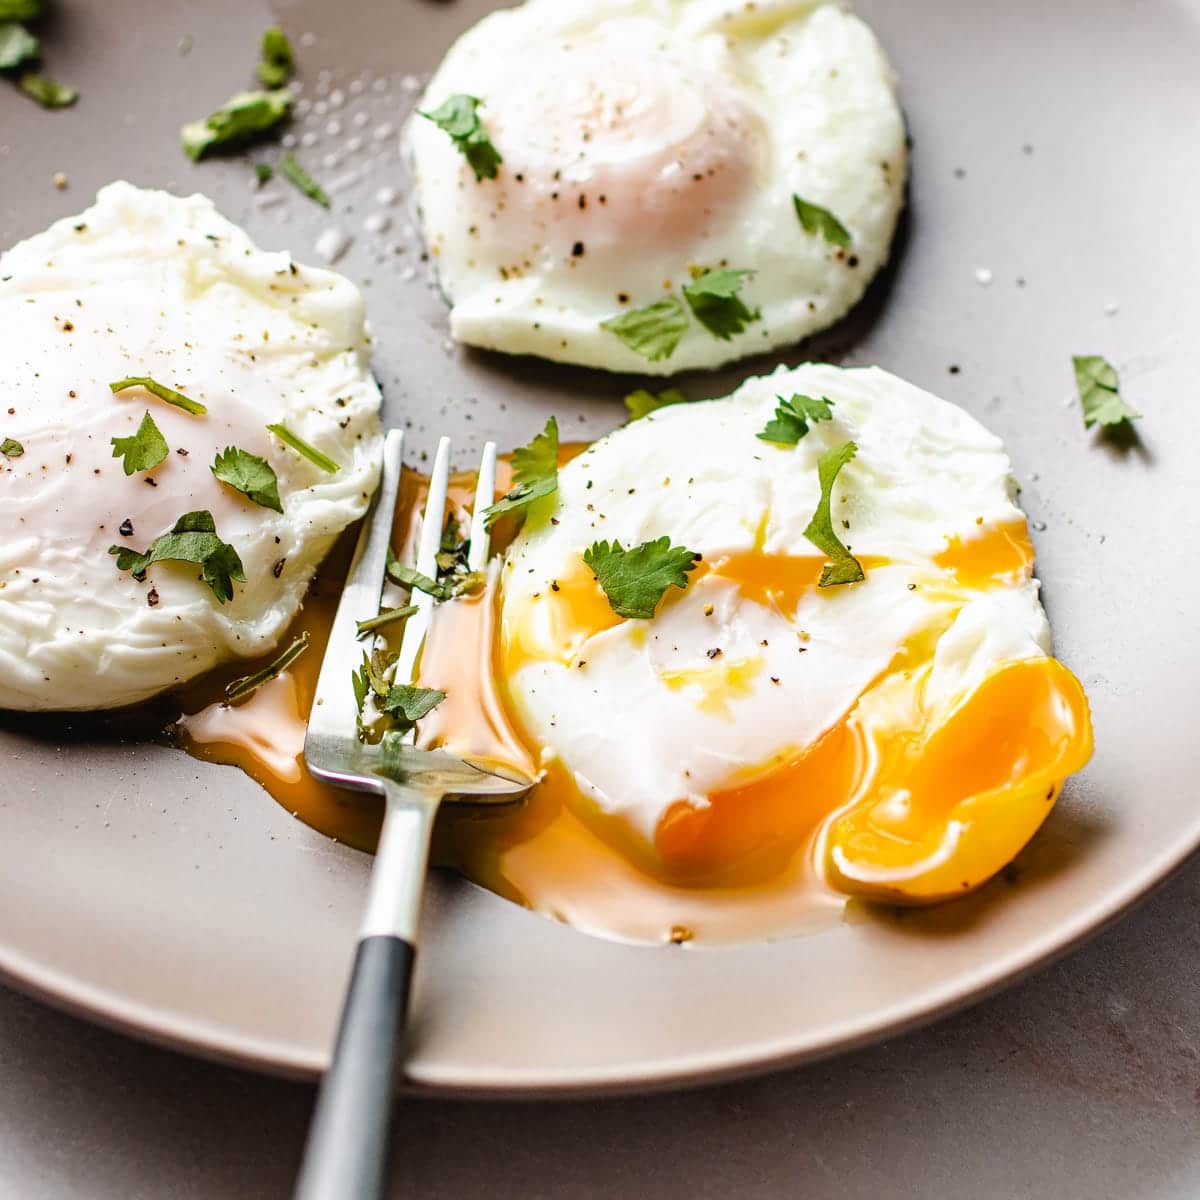 https://iheartumami.com/wp-content/uploads/2023/05/Air-fryer-poached-eggs-recipe.jpg